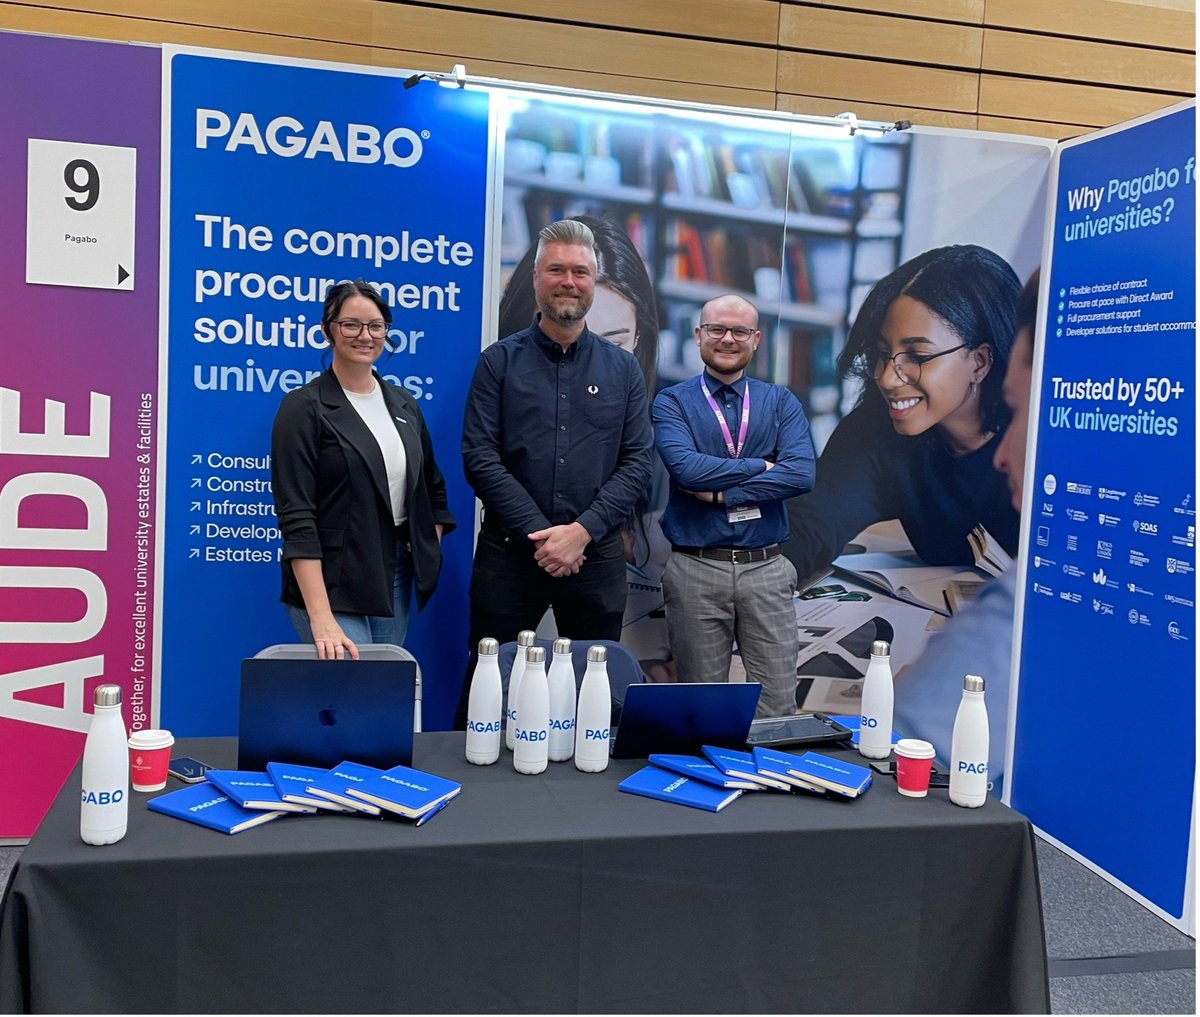 Our team are ready for the AUDE Annual Conference 2024! They'll be at stand 9 to chat about our range of procurement solutions. Over 50 UK universities have procured through Pagabo and we're looking forward to speaking with many others over the next 2 days. Come and say hello👋